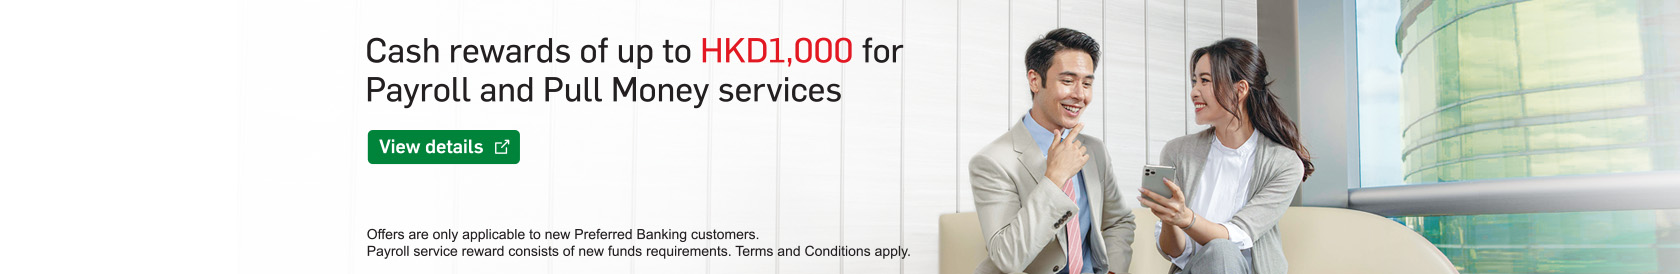 Cash rewards of up to HKD1,000 for Payroll and Pull Money services. View details. Opens in a new window